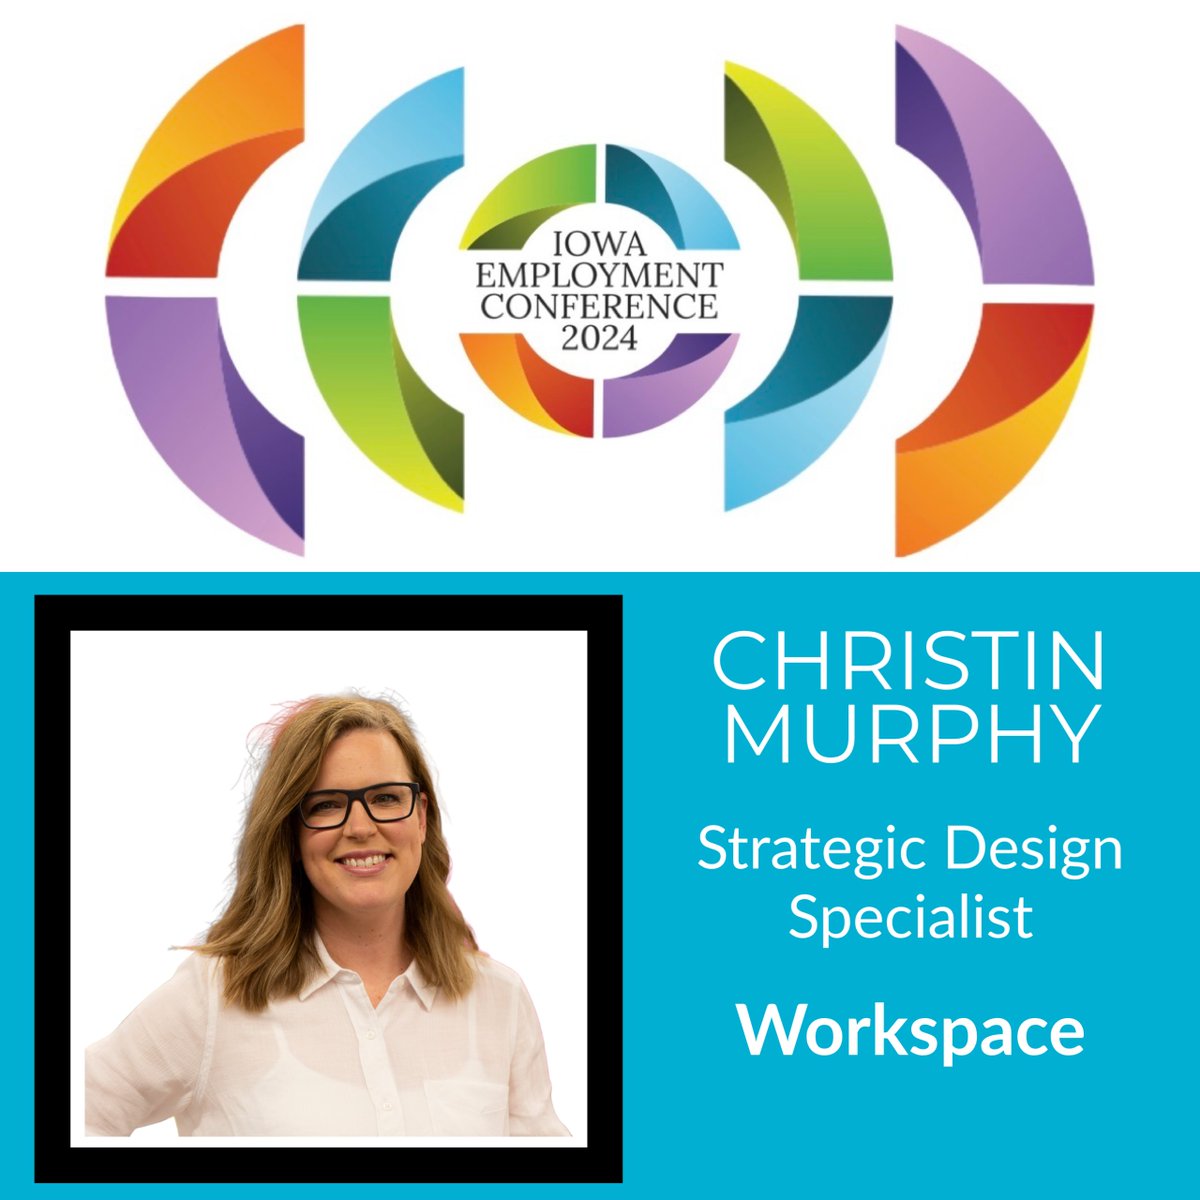 Excited to announce #IEC2024 Speaker, Christin Murphy, with WORKSPACE! Bio here: conta.cc/42brAim Register to see Christin in action! conta.cc/42d7wMI #continuingeducation #professionaldevelopment #humanresources #leadership